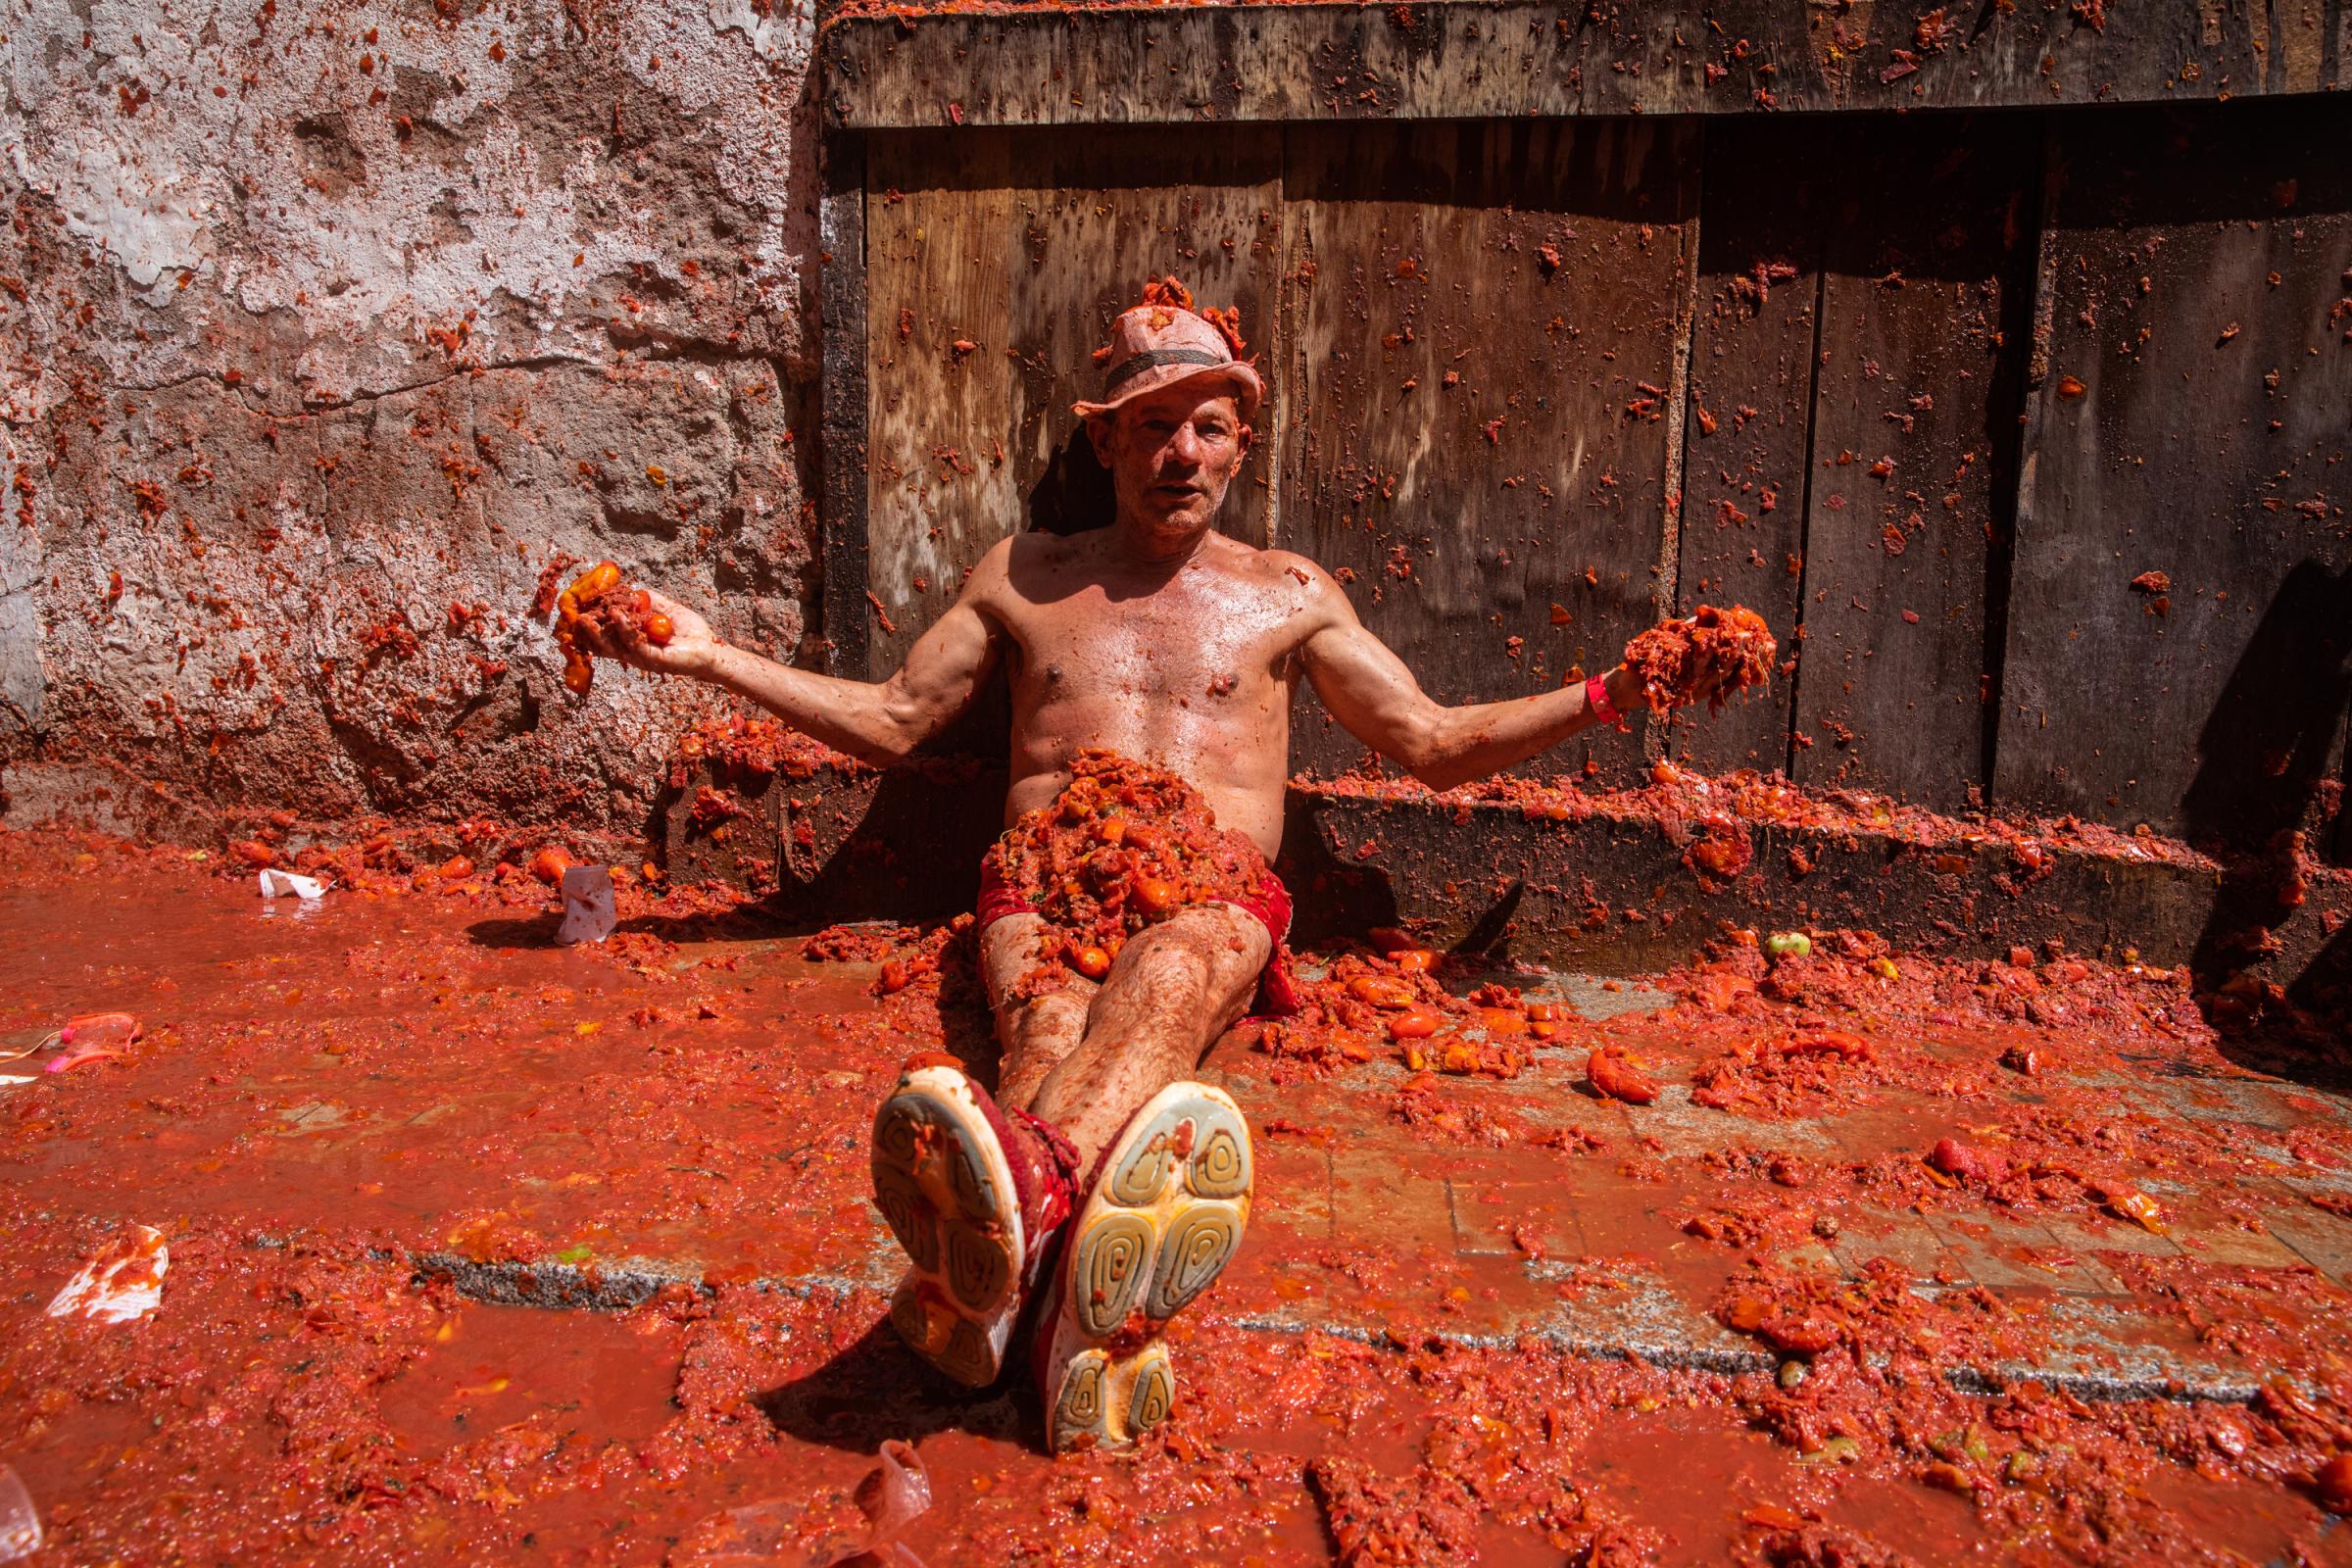 Spain's Tomato Throwing Festival Returns After Covid Hiatus For The 75th Edition - BUNOL, SPAIN - AUGUST 31: Revelers celebrate and throw...